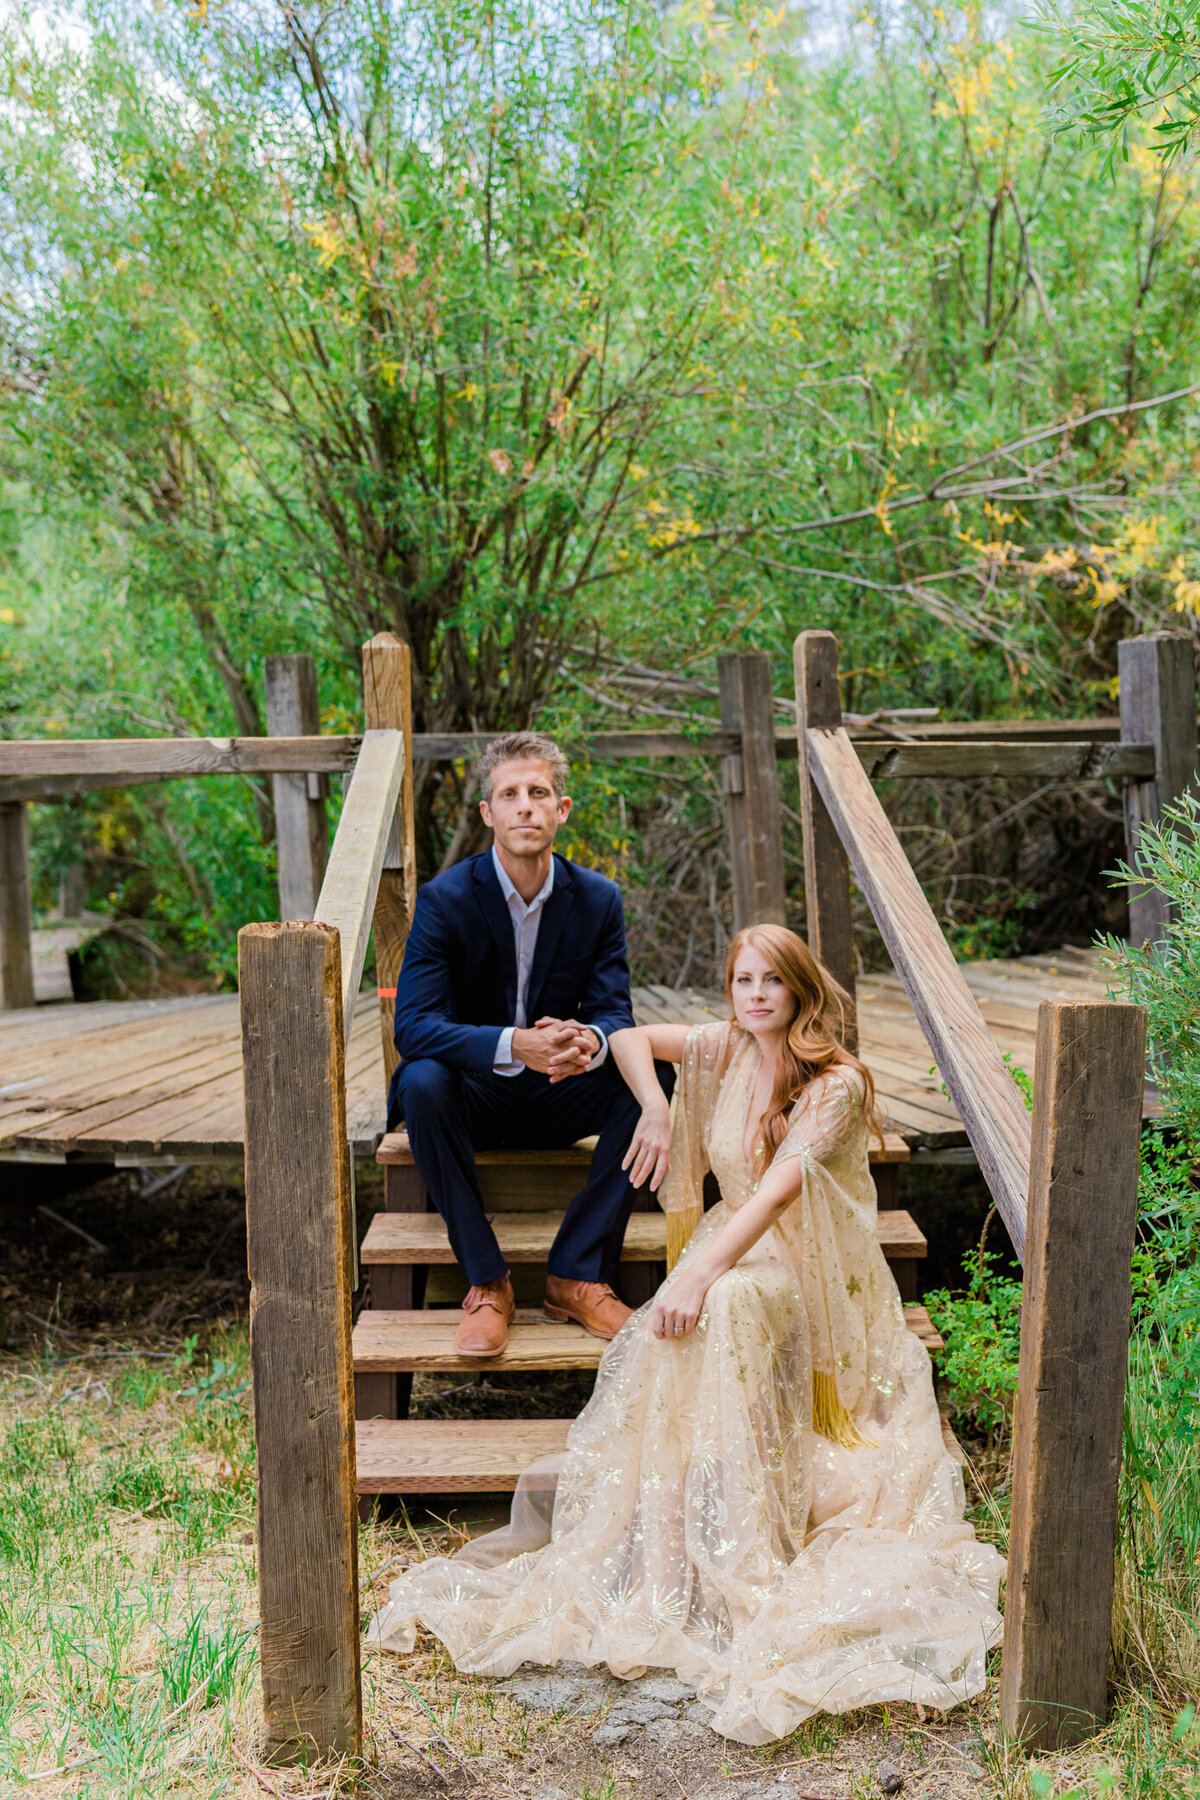 Wrightwood Elopement, Mountain Elopement, Forest Elopement, Wrightwood Elopement Photographer, Elopement Photographer, Wrightwood Photographer E&N-11